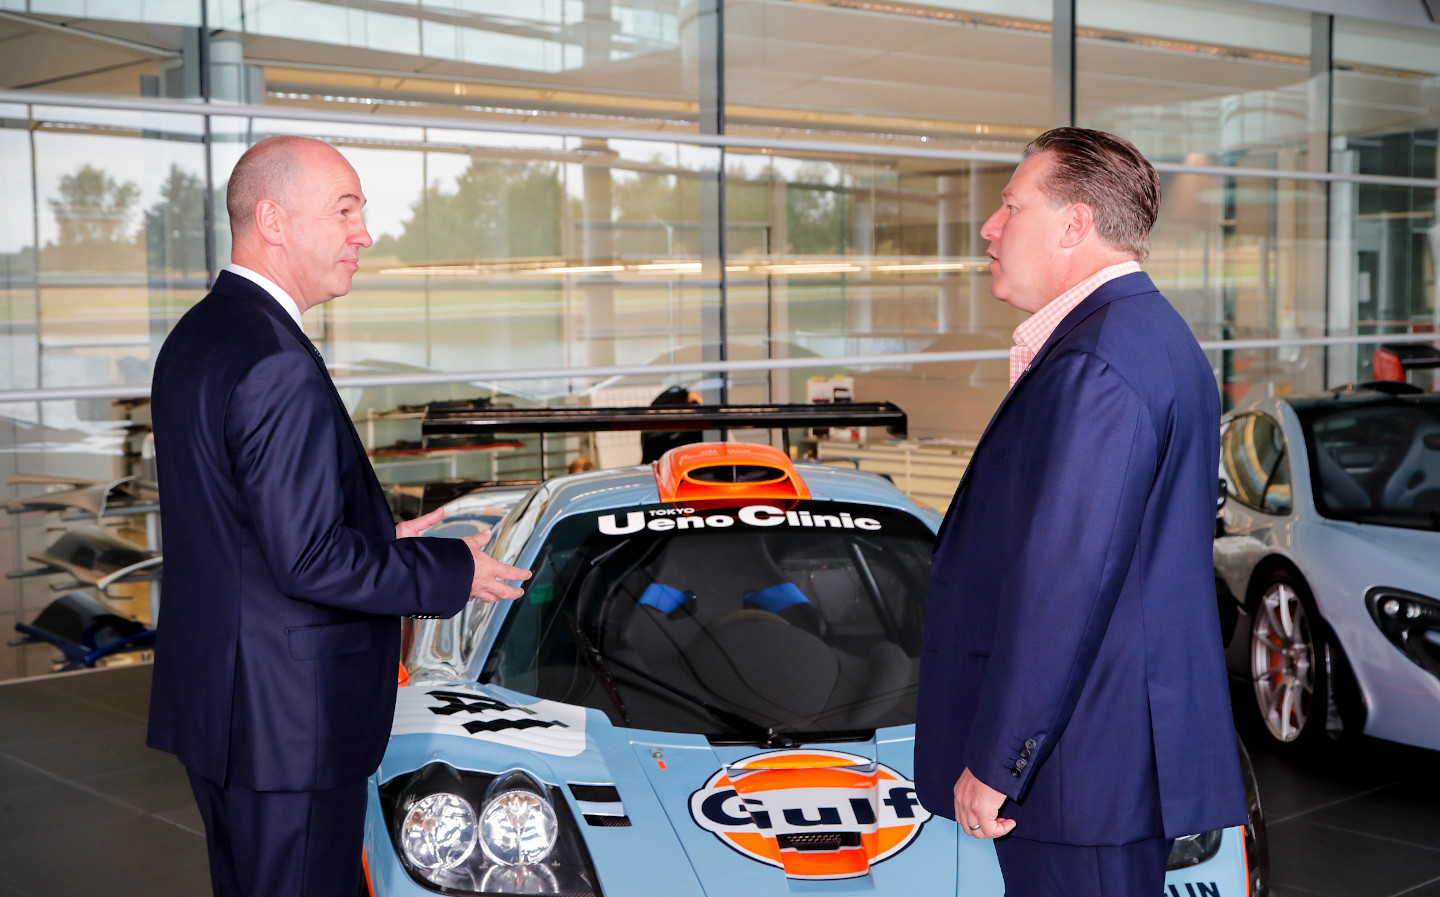 Gulf Oil returns to F1 with McLaren